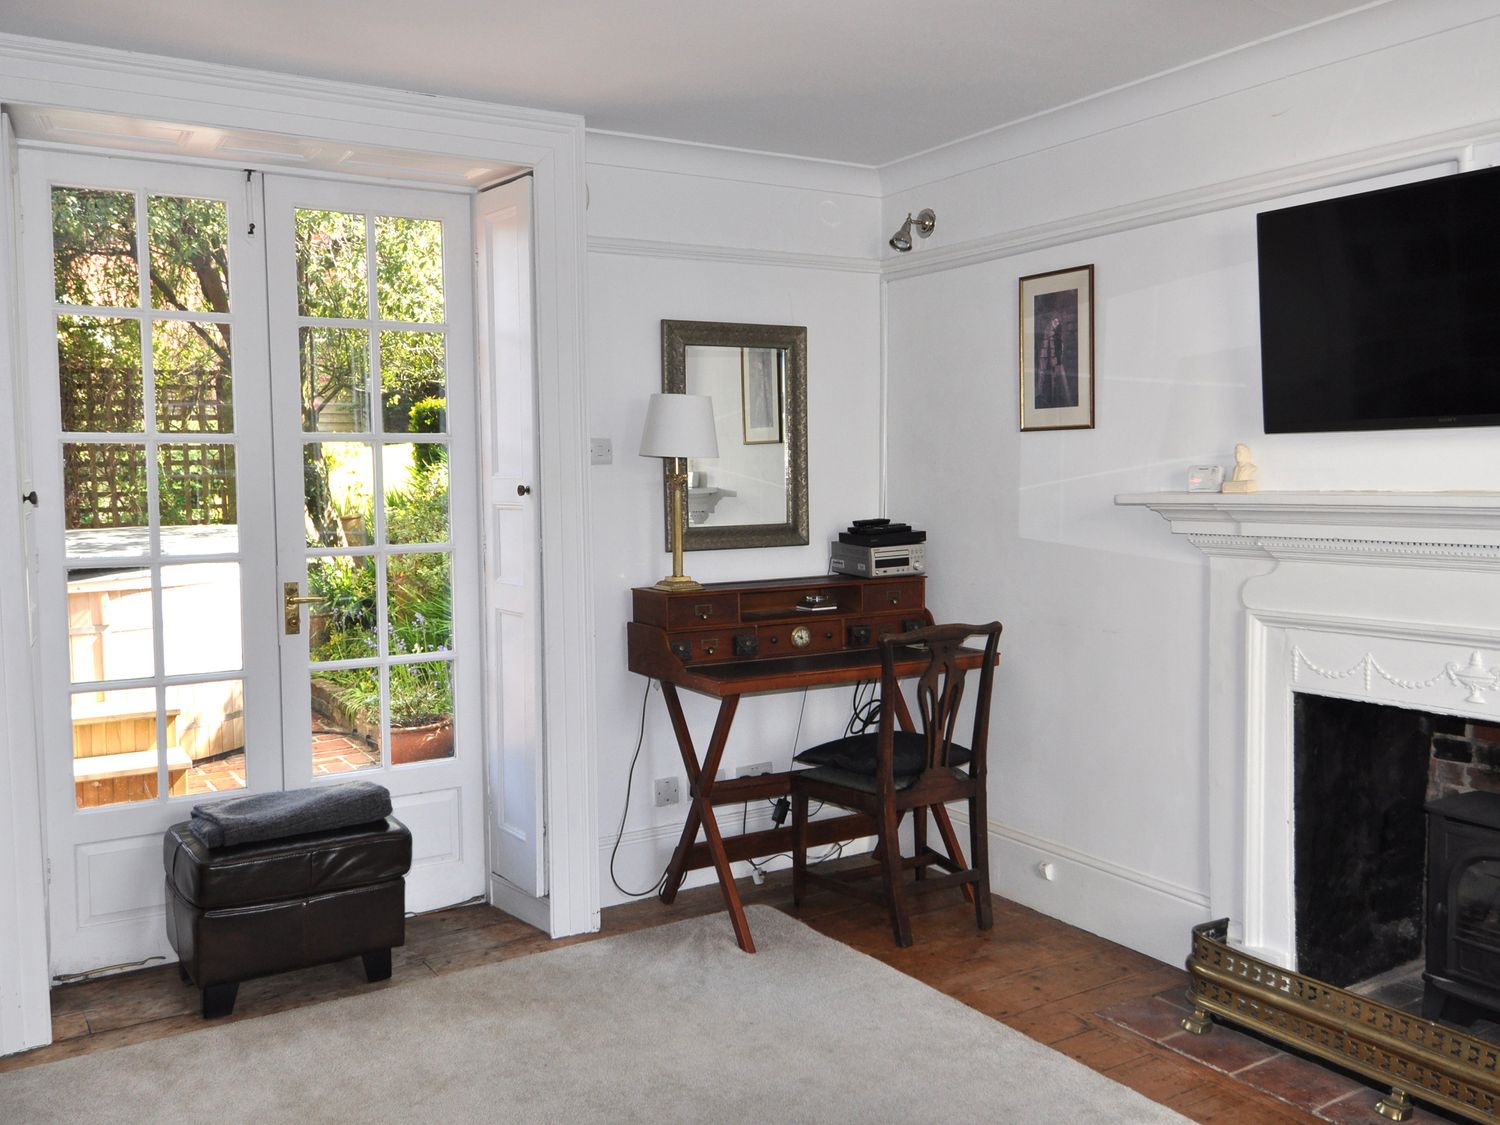 Coppice Hill House, Bishop's Castle, Hampshire, en-suite, 2 dogs welcome, woodburning stove, hot tub